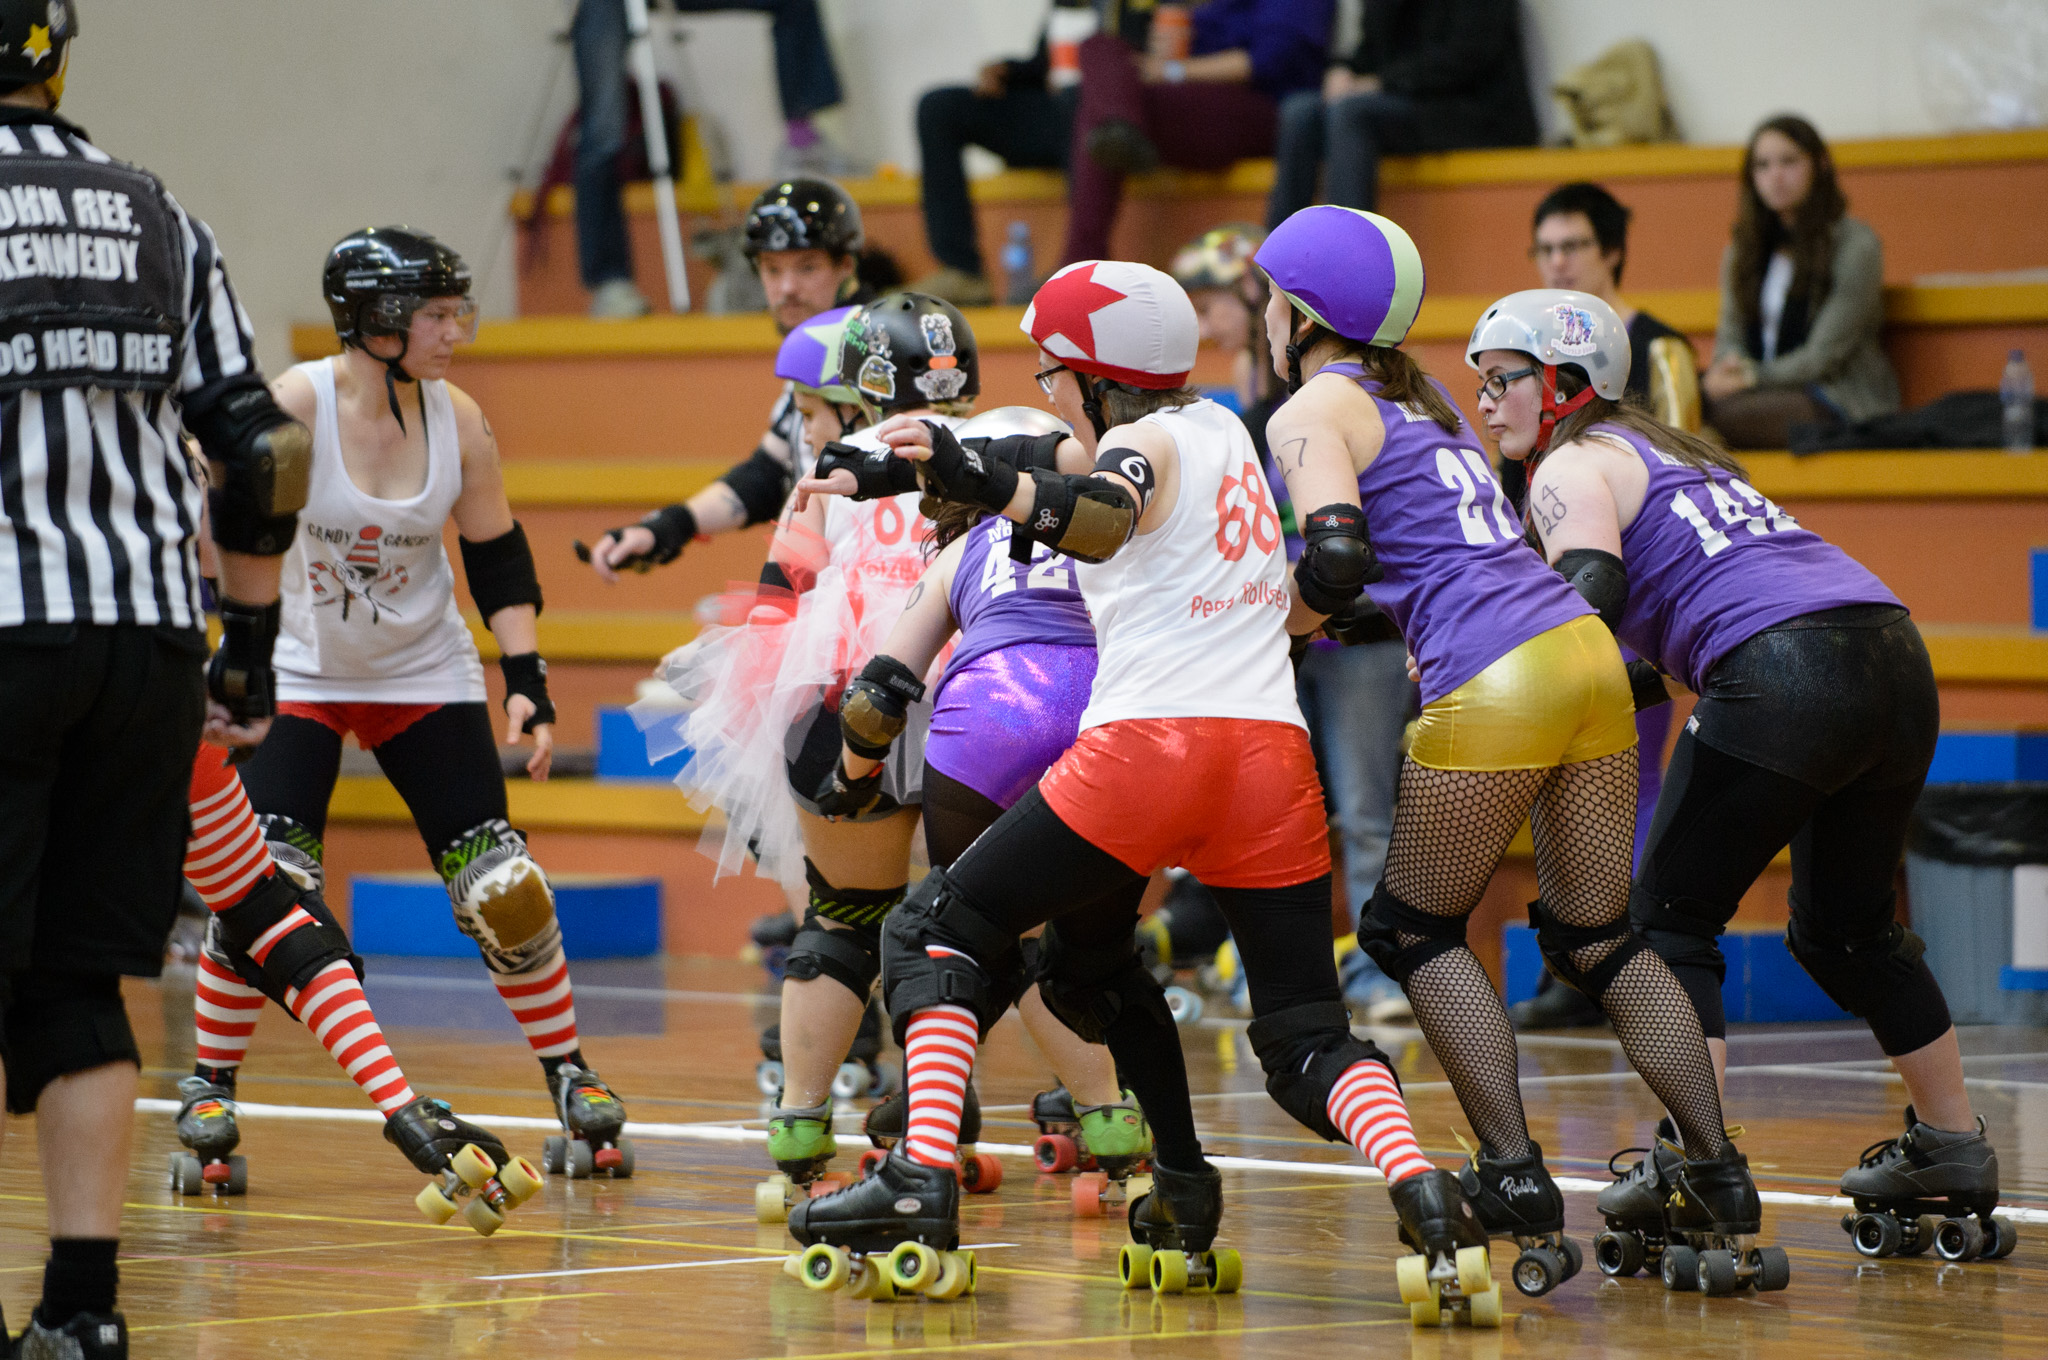 Hot Jammer Donuts v Candy Caners. Photographer: Brett Sargeant, D-eye Photography